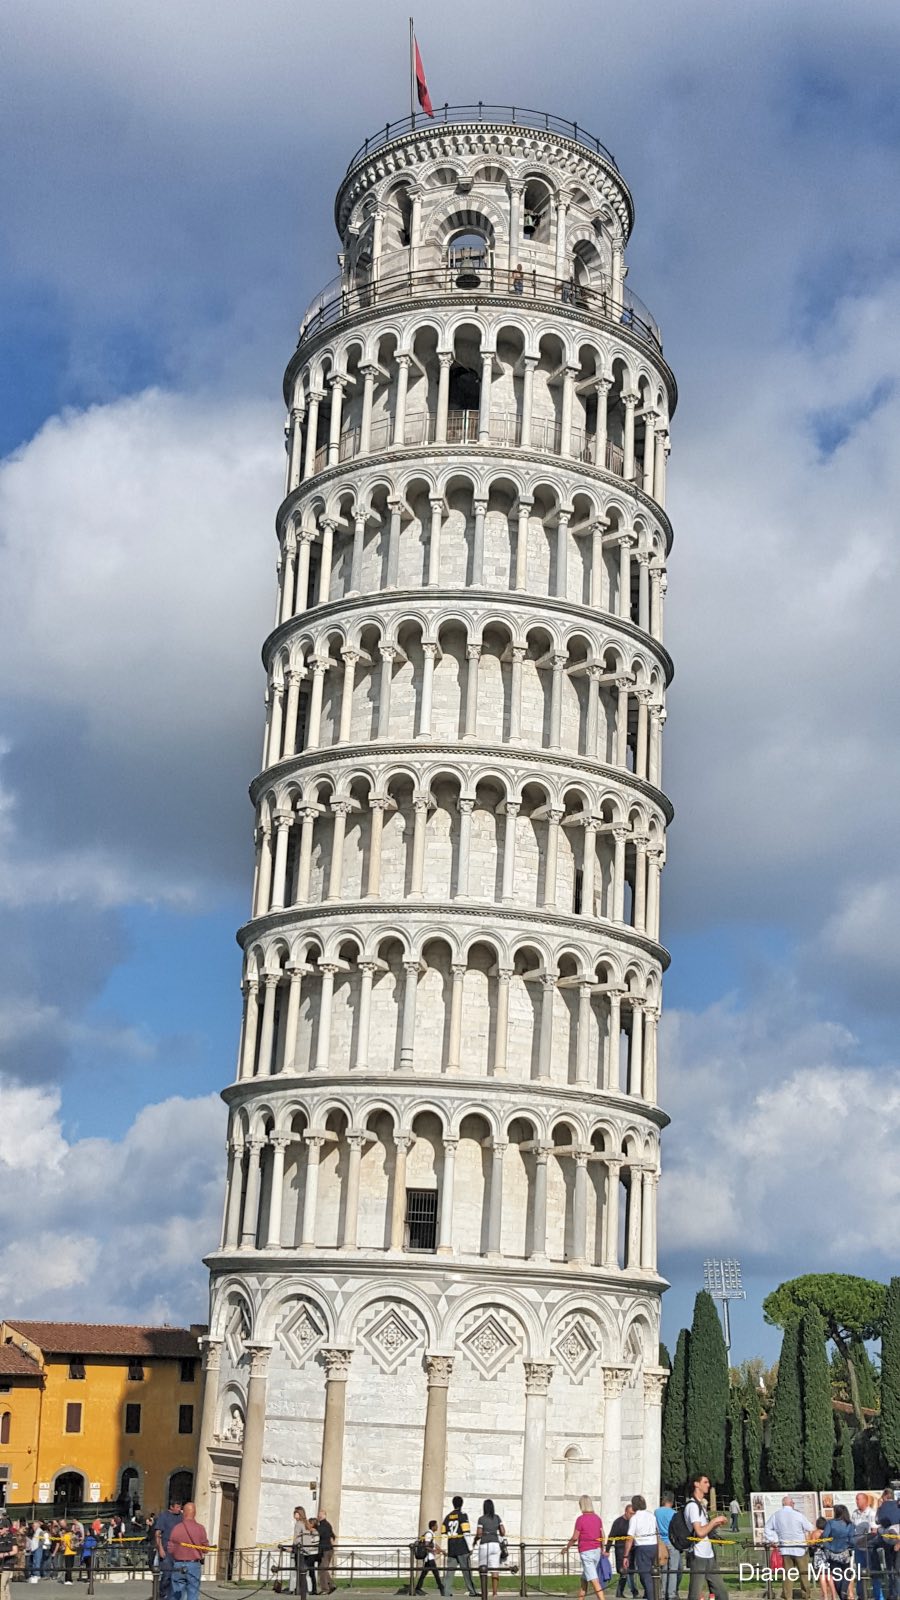 The Leaning Tower of Pisa, Italy